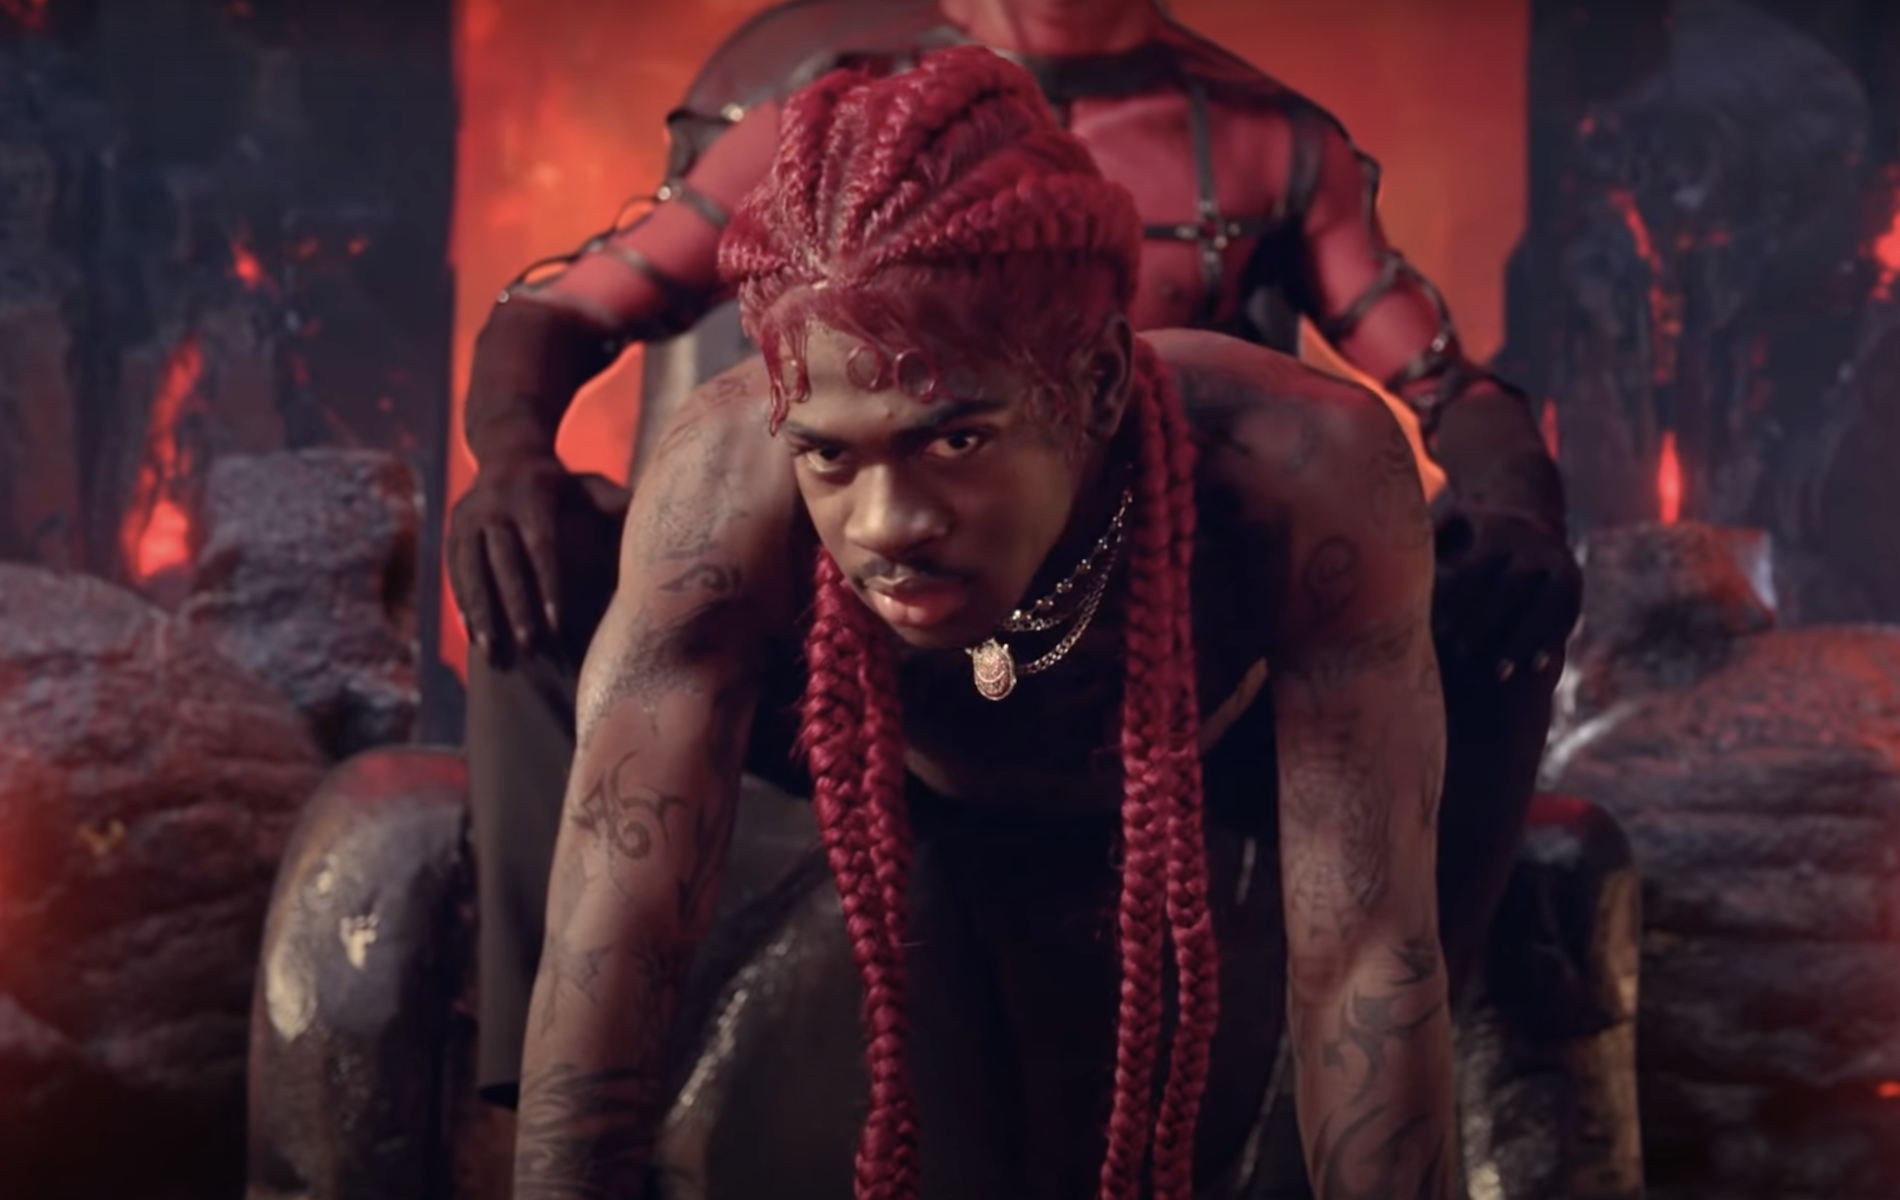 Lil Nas X Gives Satan a Lap Dance in a Fiery, Very Queer New Video.